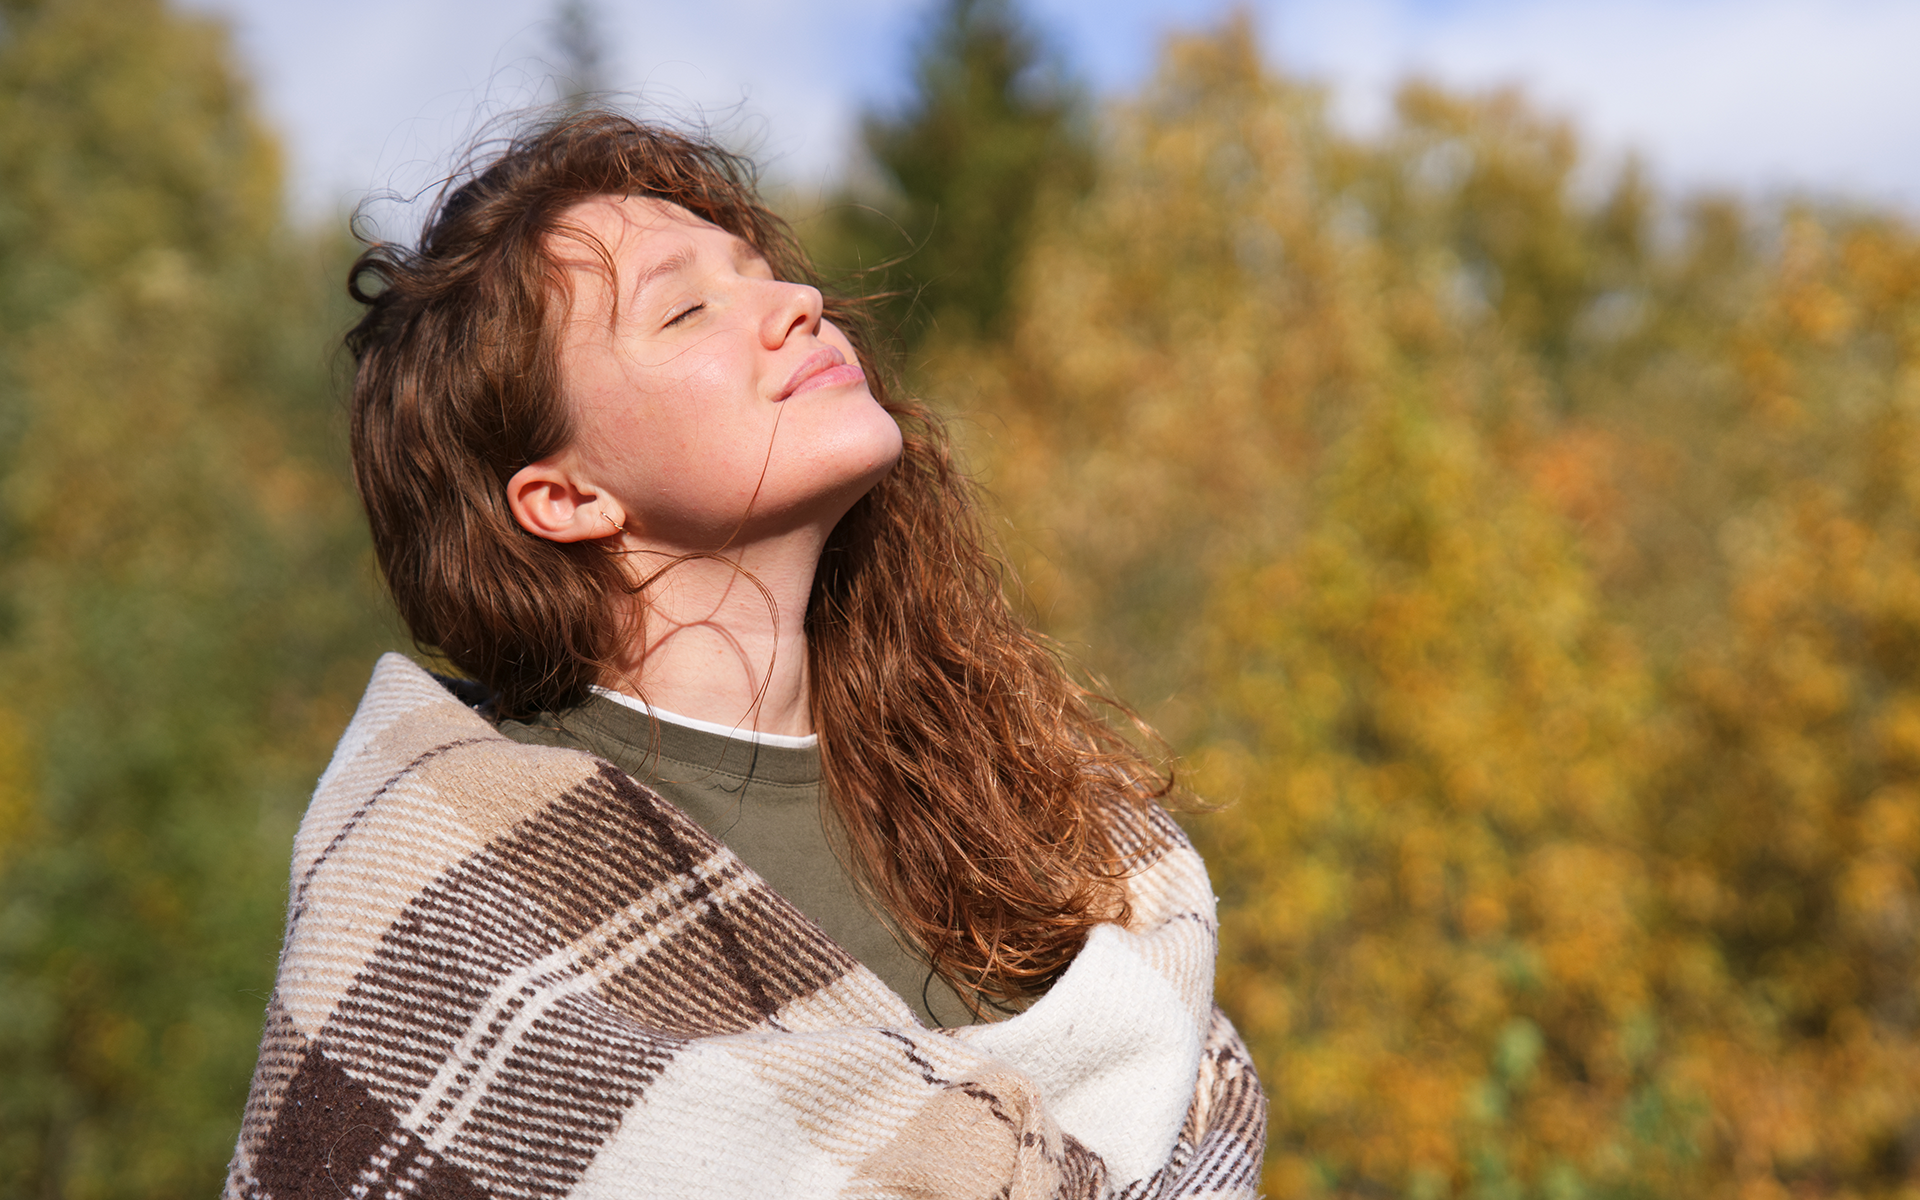 Photo of a white woman with curly brown hair stands outside with her face turned up toward the sun with a peaceful expression, she is wrapped in a brown scarf.